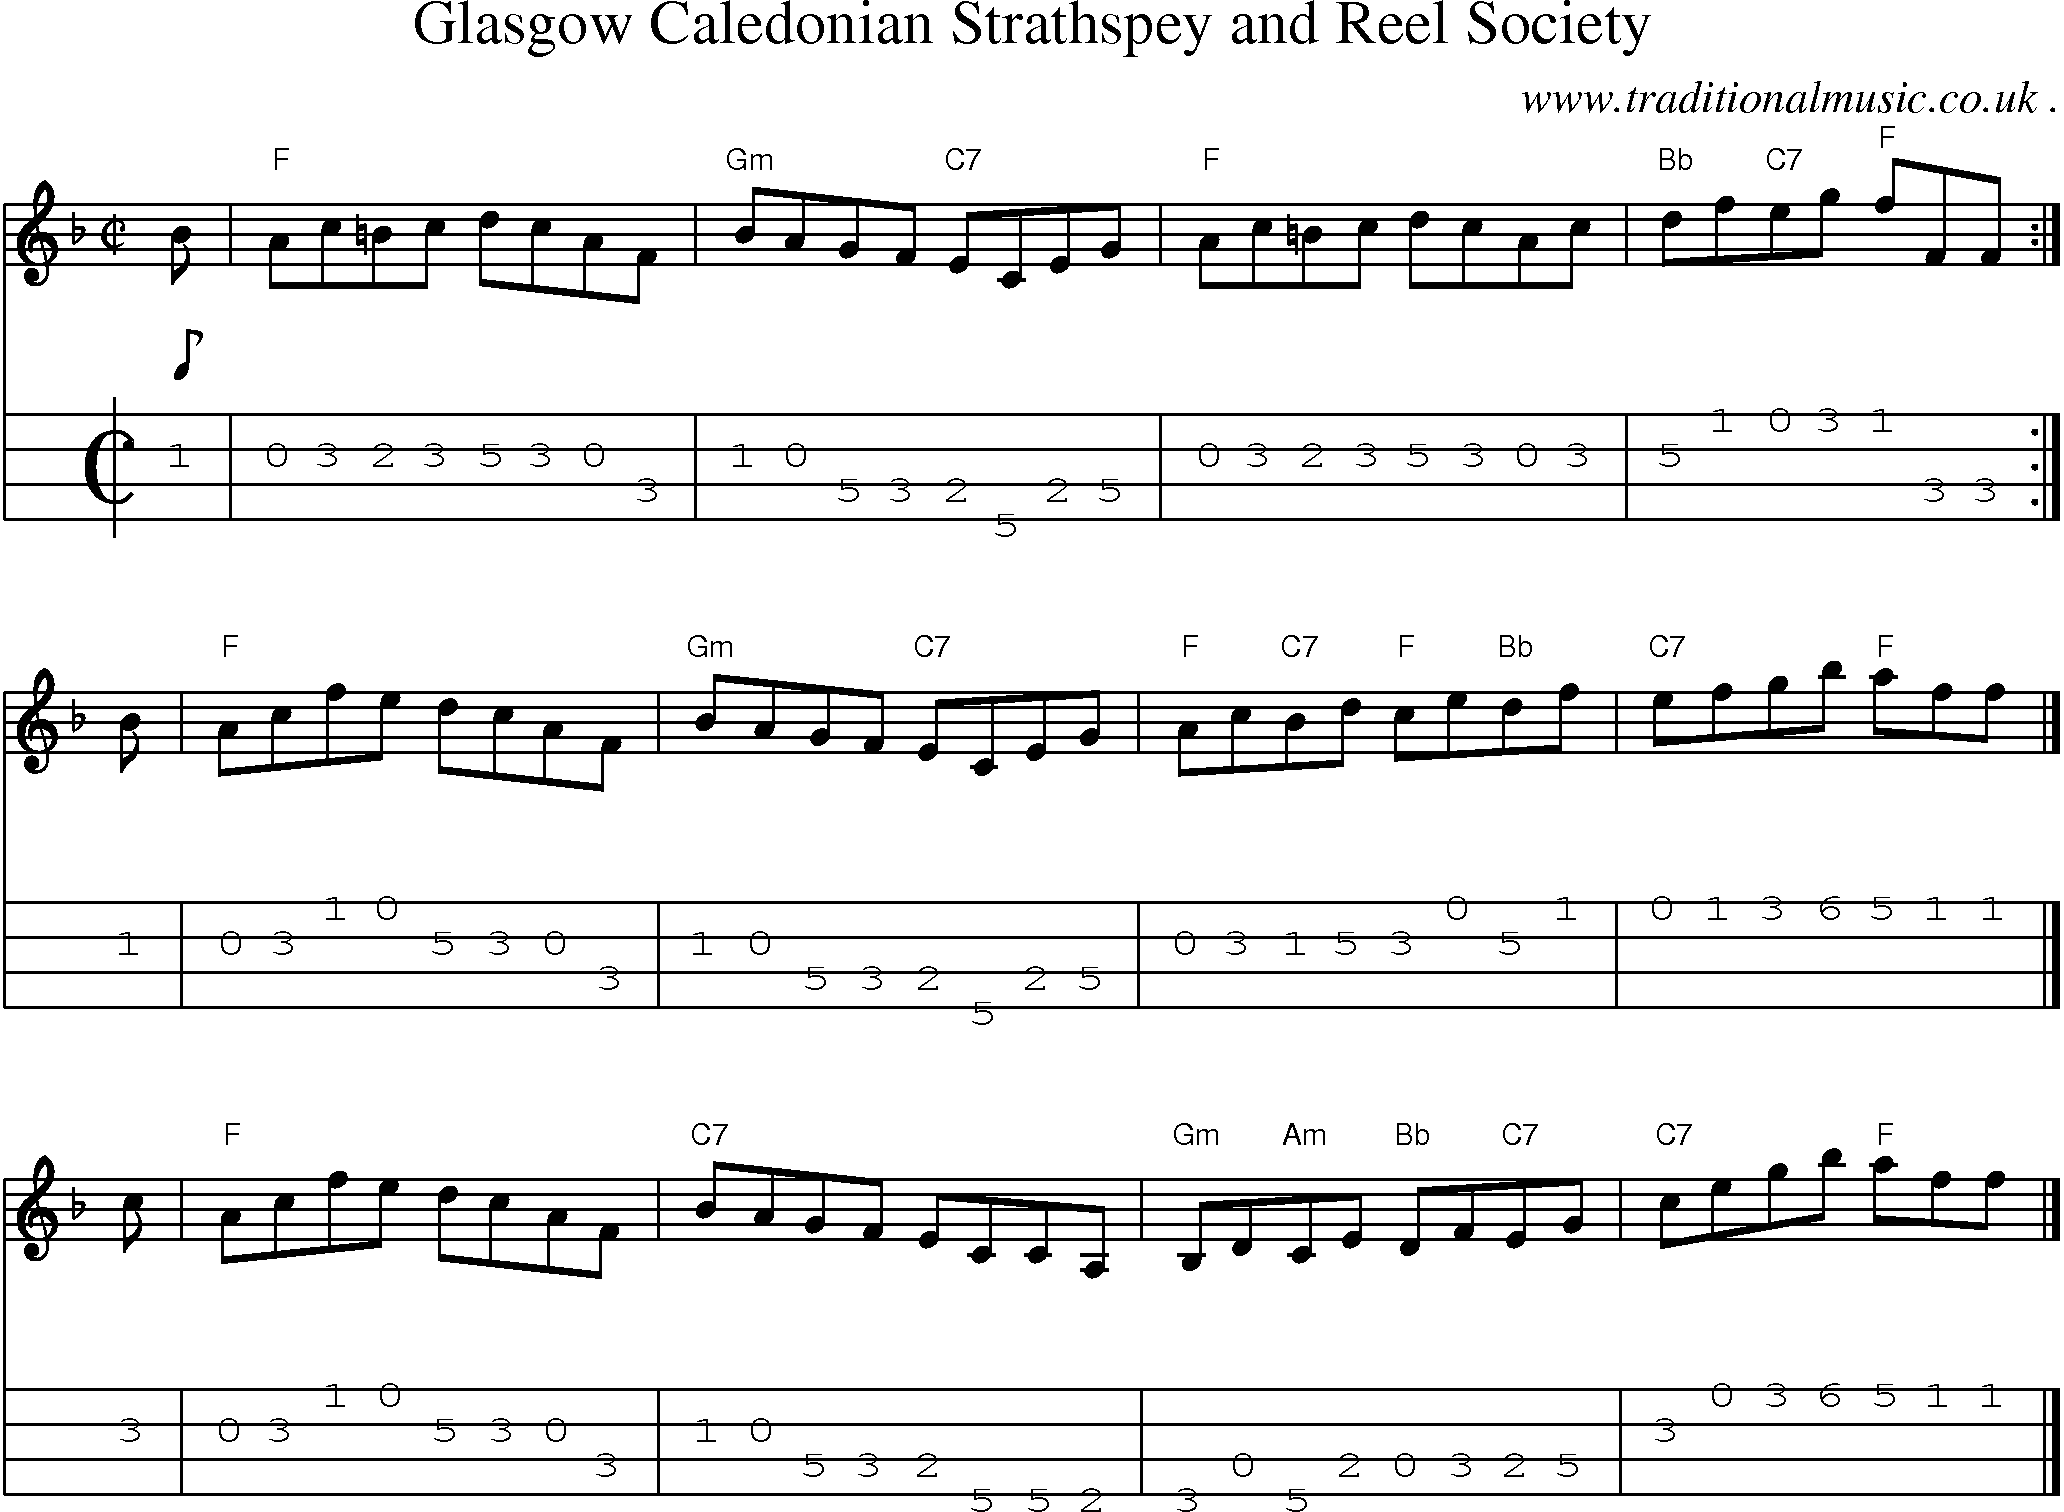 Sheet-music  score, Chords and Mandolin Tabs for Glasgow Caledonian Strathspey And Reel Society